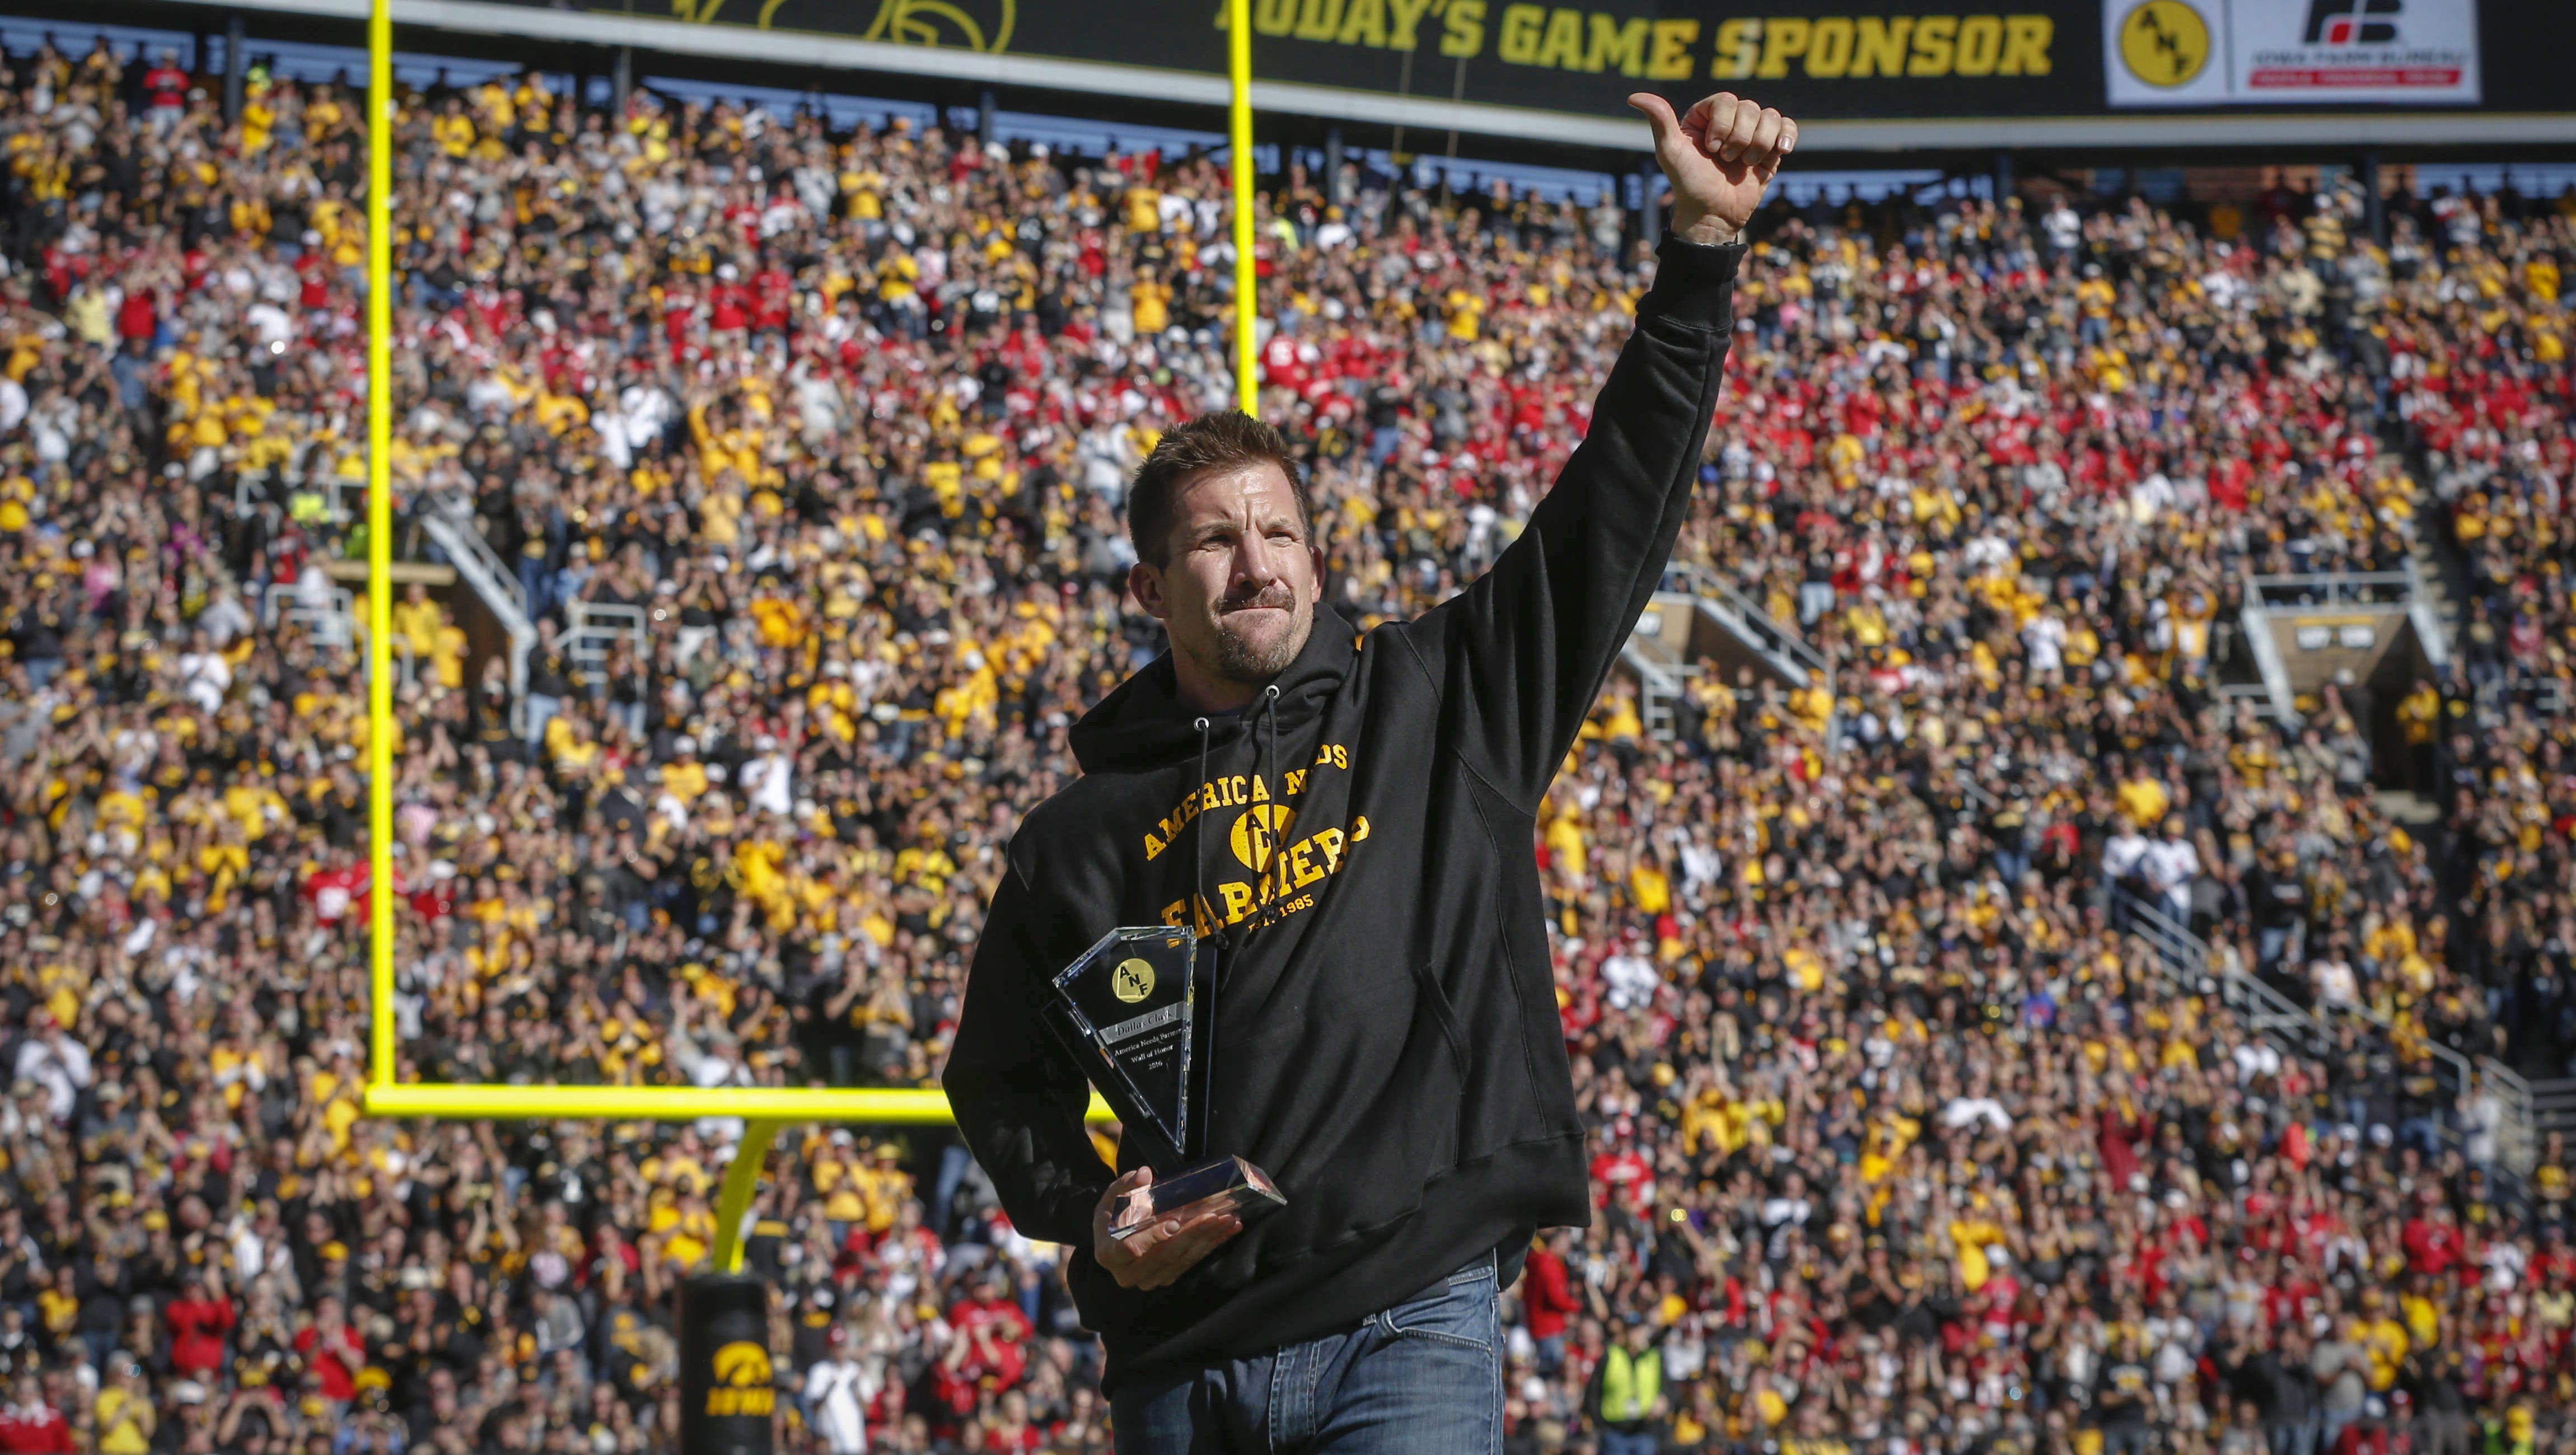 Former Hawkeye and NFL tight end Dallas Clark received the America Needs Farmers Wall of Honor trophy during a break in action against Wisconsin on Saturday, Oct. 22, 2016, at Kinnick Stadium in Iowa City.